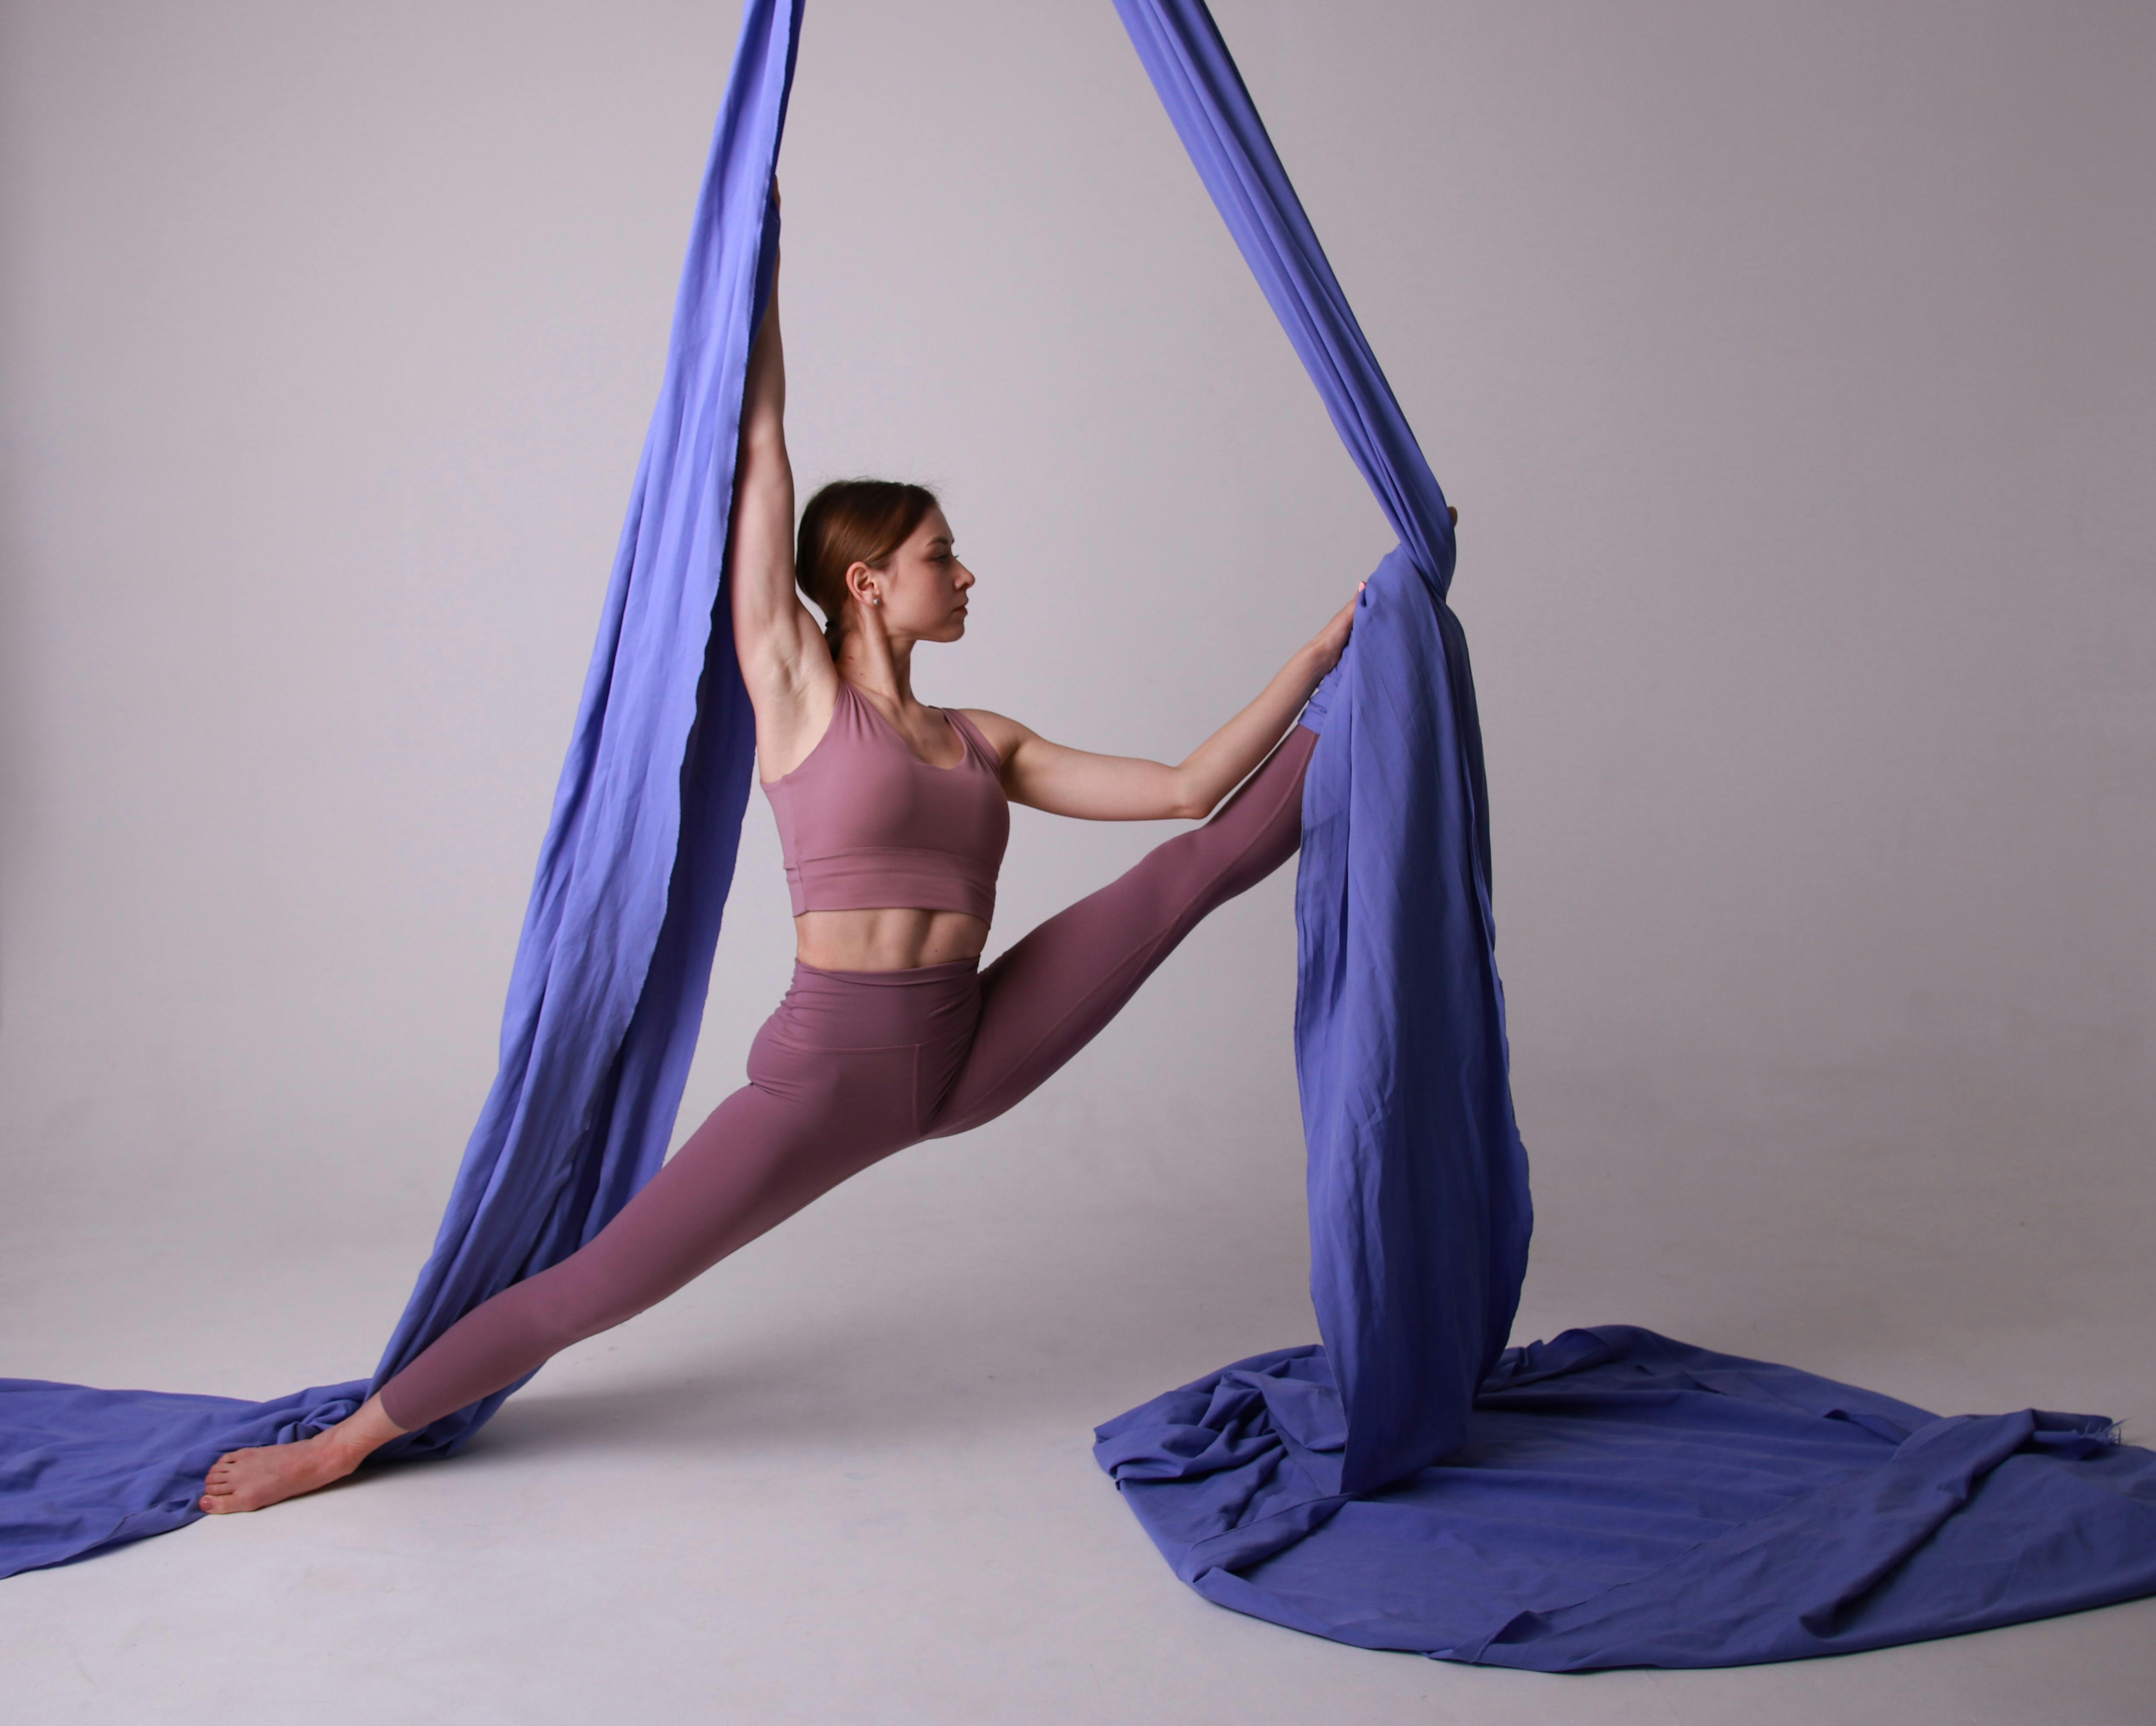 A Beginner's Guide on How to Use a Yoga Swing